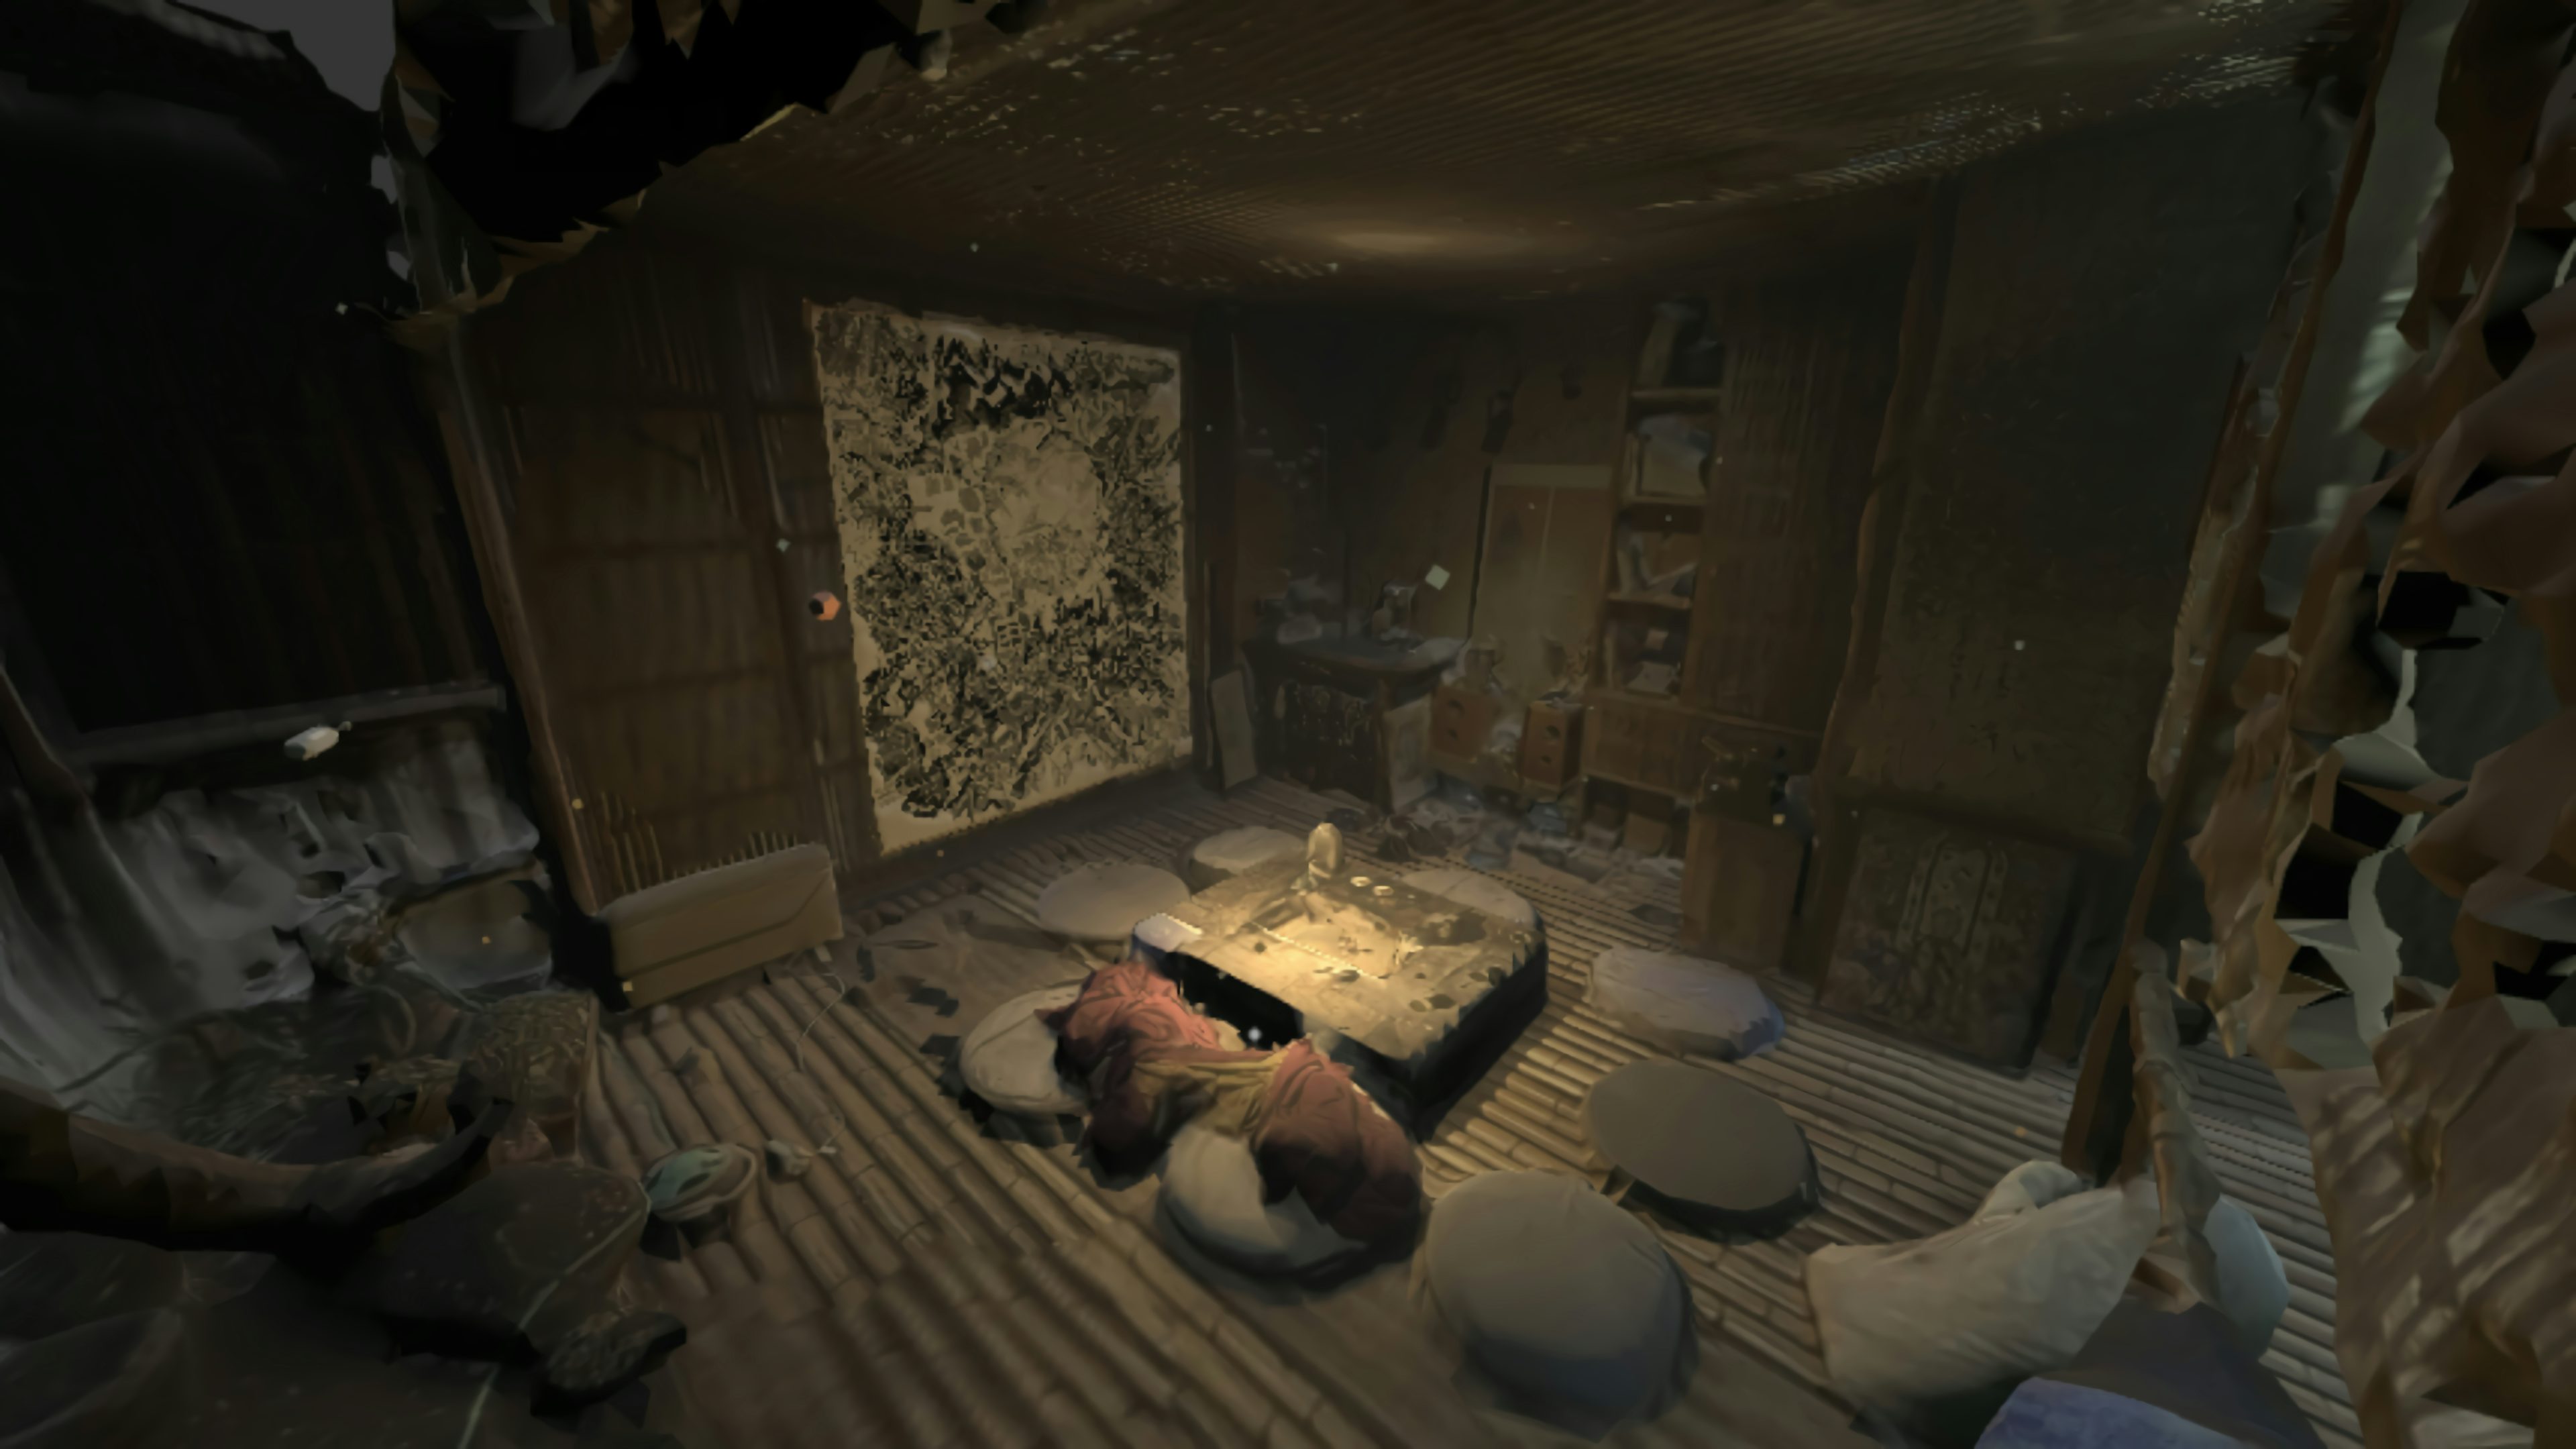 Image 2, Cultivator’s tearoom with the painting and audio object, The painting on the wall is linked to NFT in the Easter eggs collection (https://opensea.io/assets/matic/0x2953399124f0cbb46d2cbacd8a89cf0599974963/106384092733743282742190300972340540075131705928293053591744315070325605793892), player’s view, a screenshot of the game scene, 2022